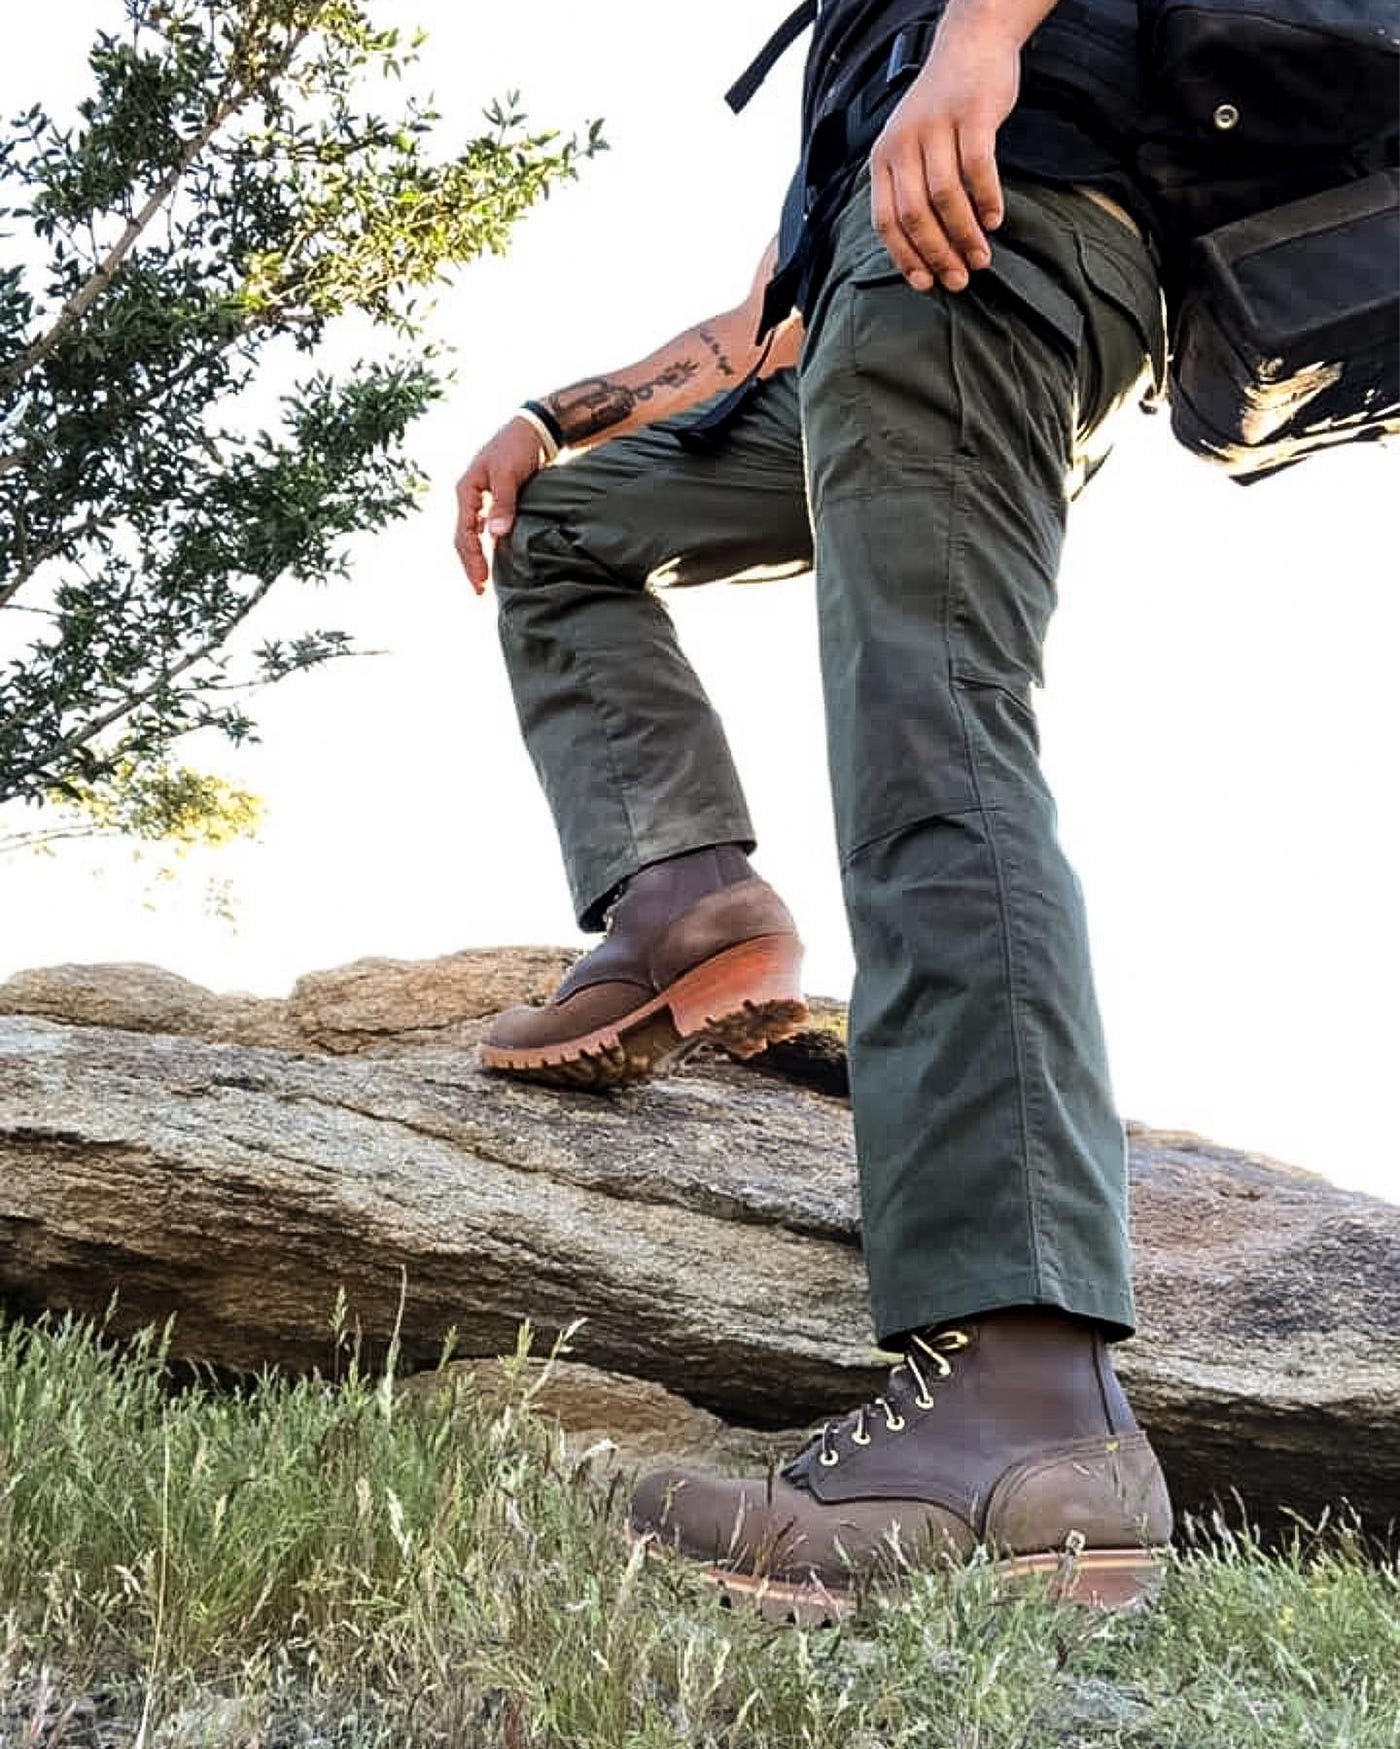 The Best Work Boots for Plantar Fasciitis